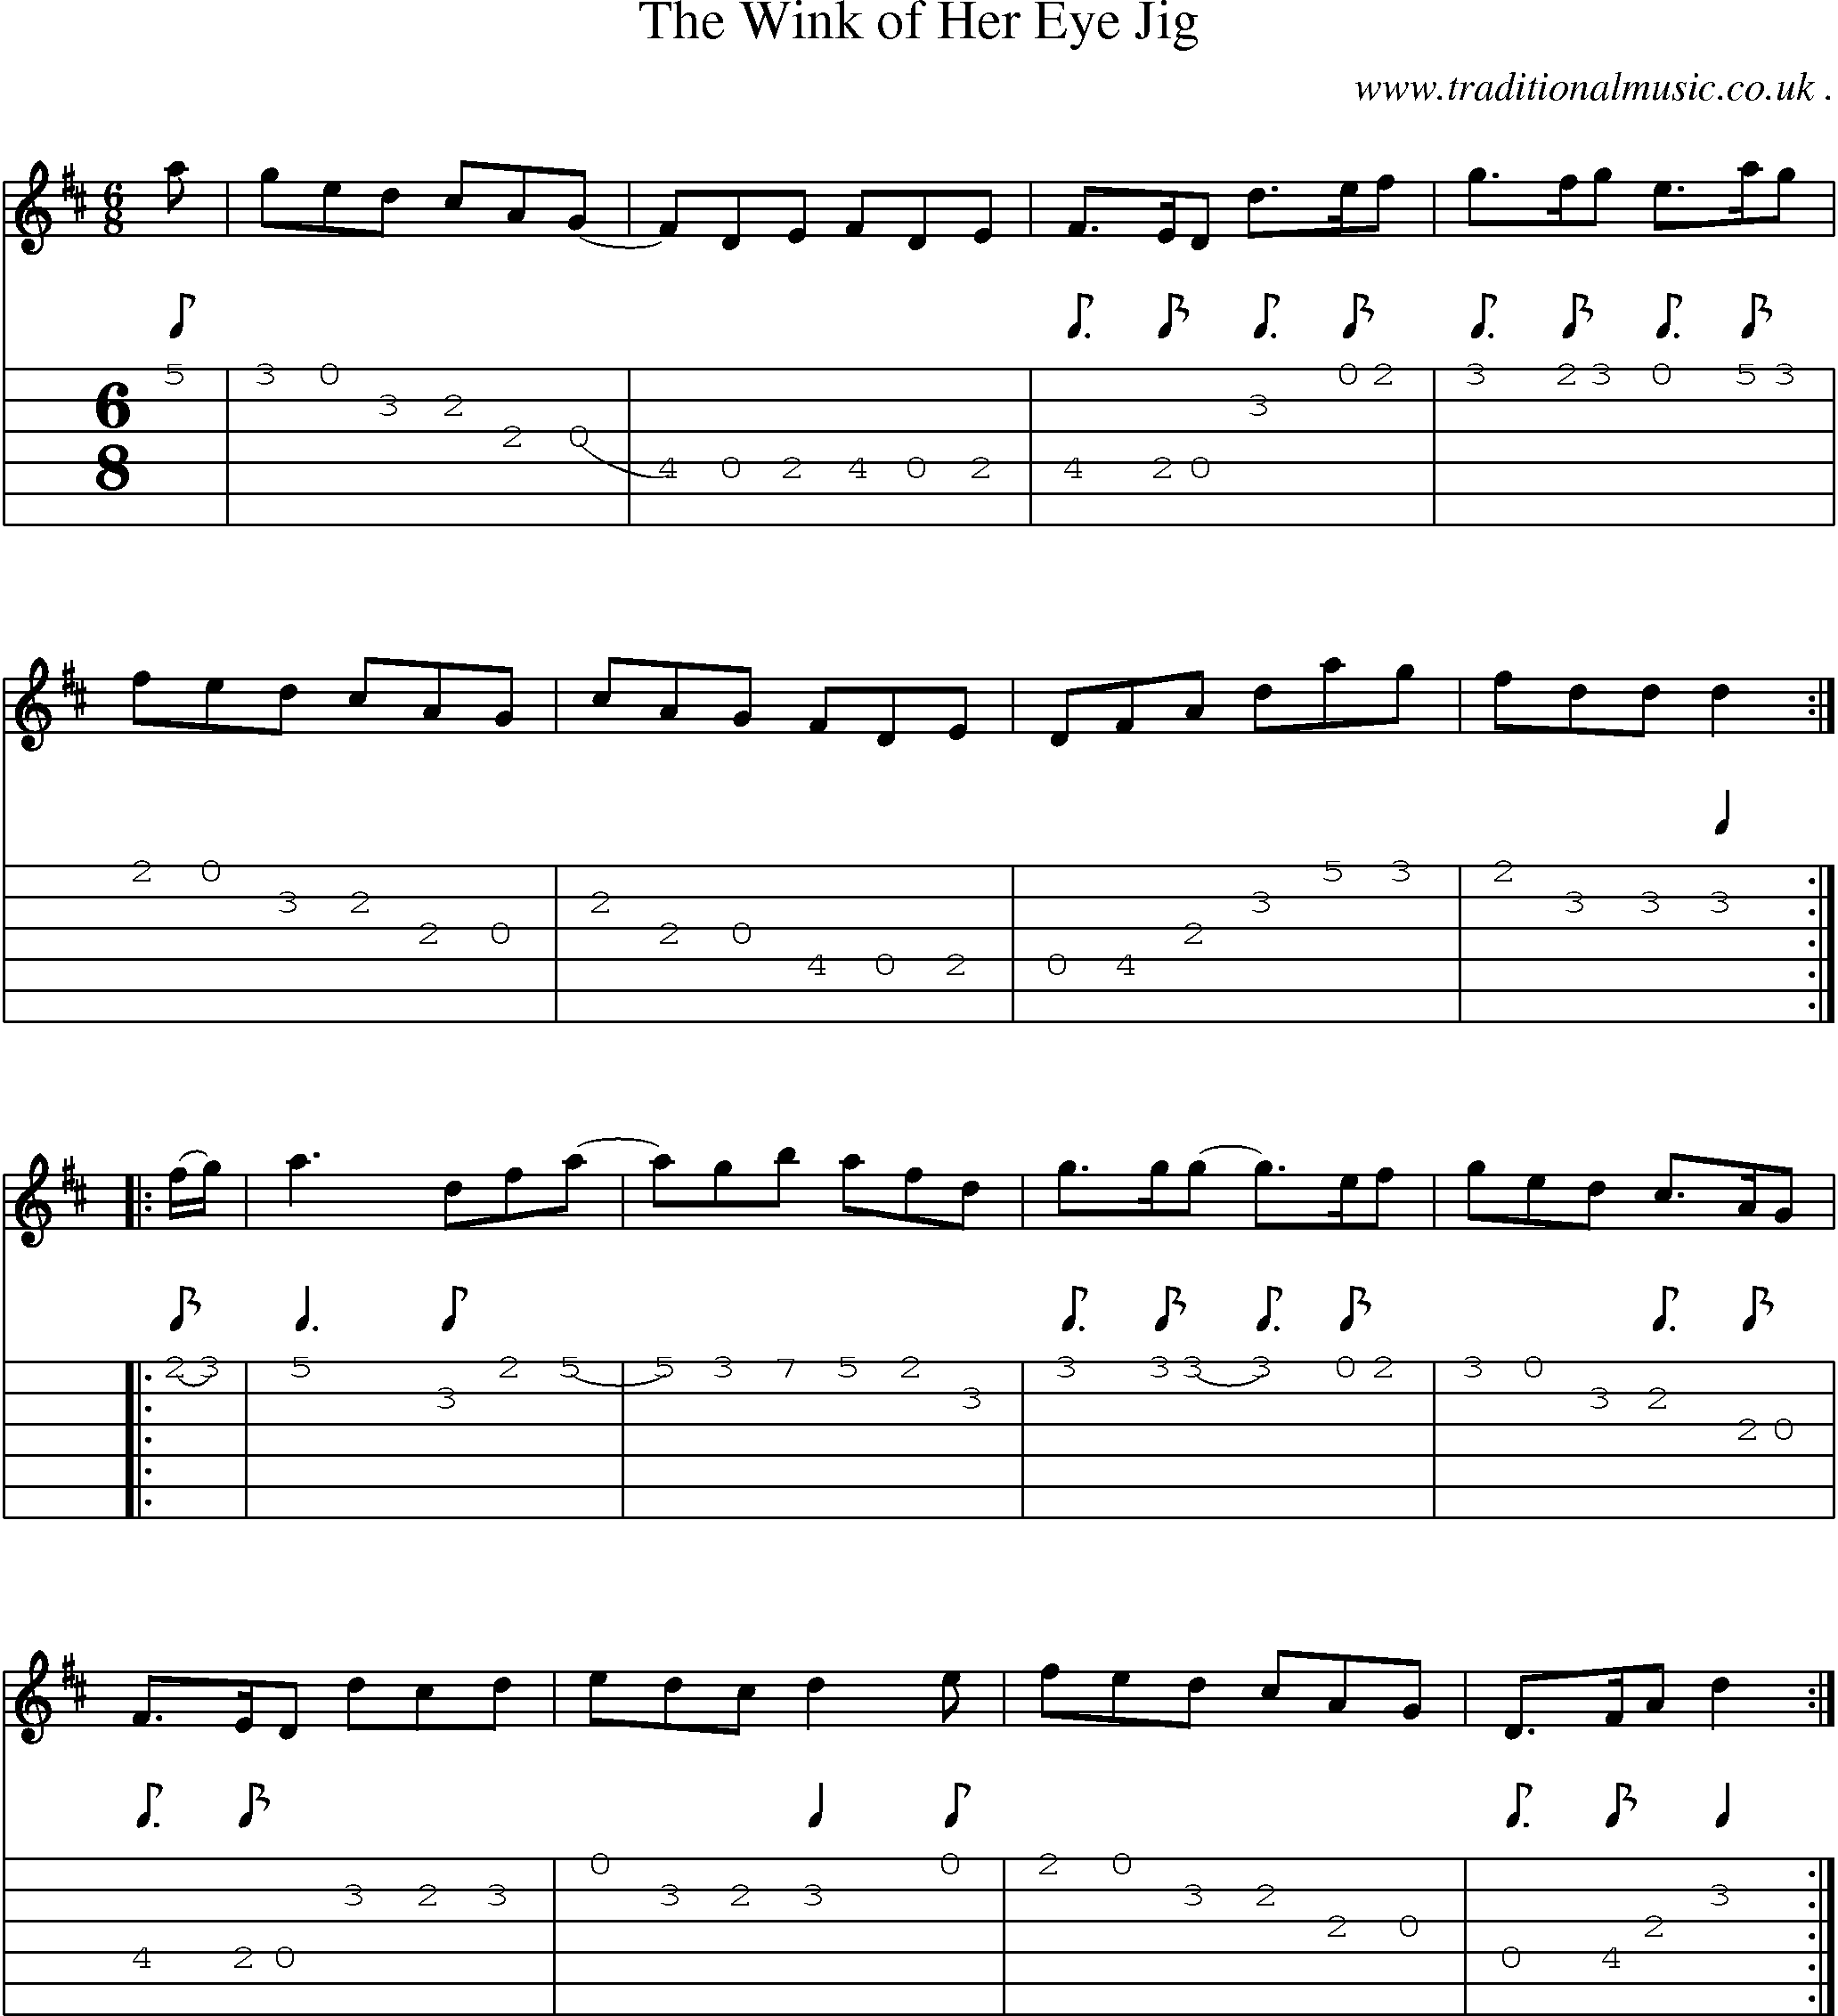 Sheet-Music and Guitar Tabs for The Wink Of Her Eye Jig